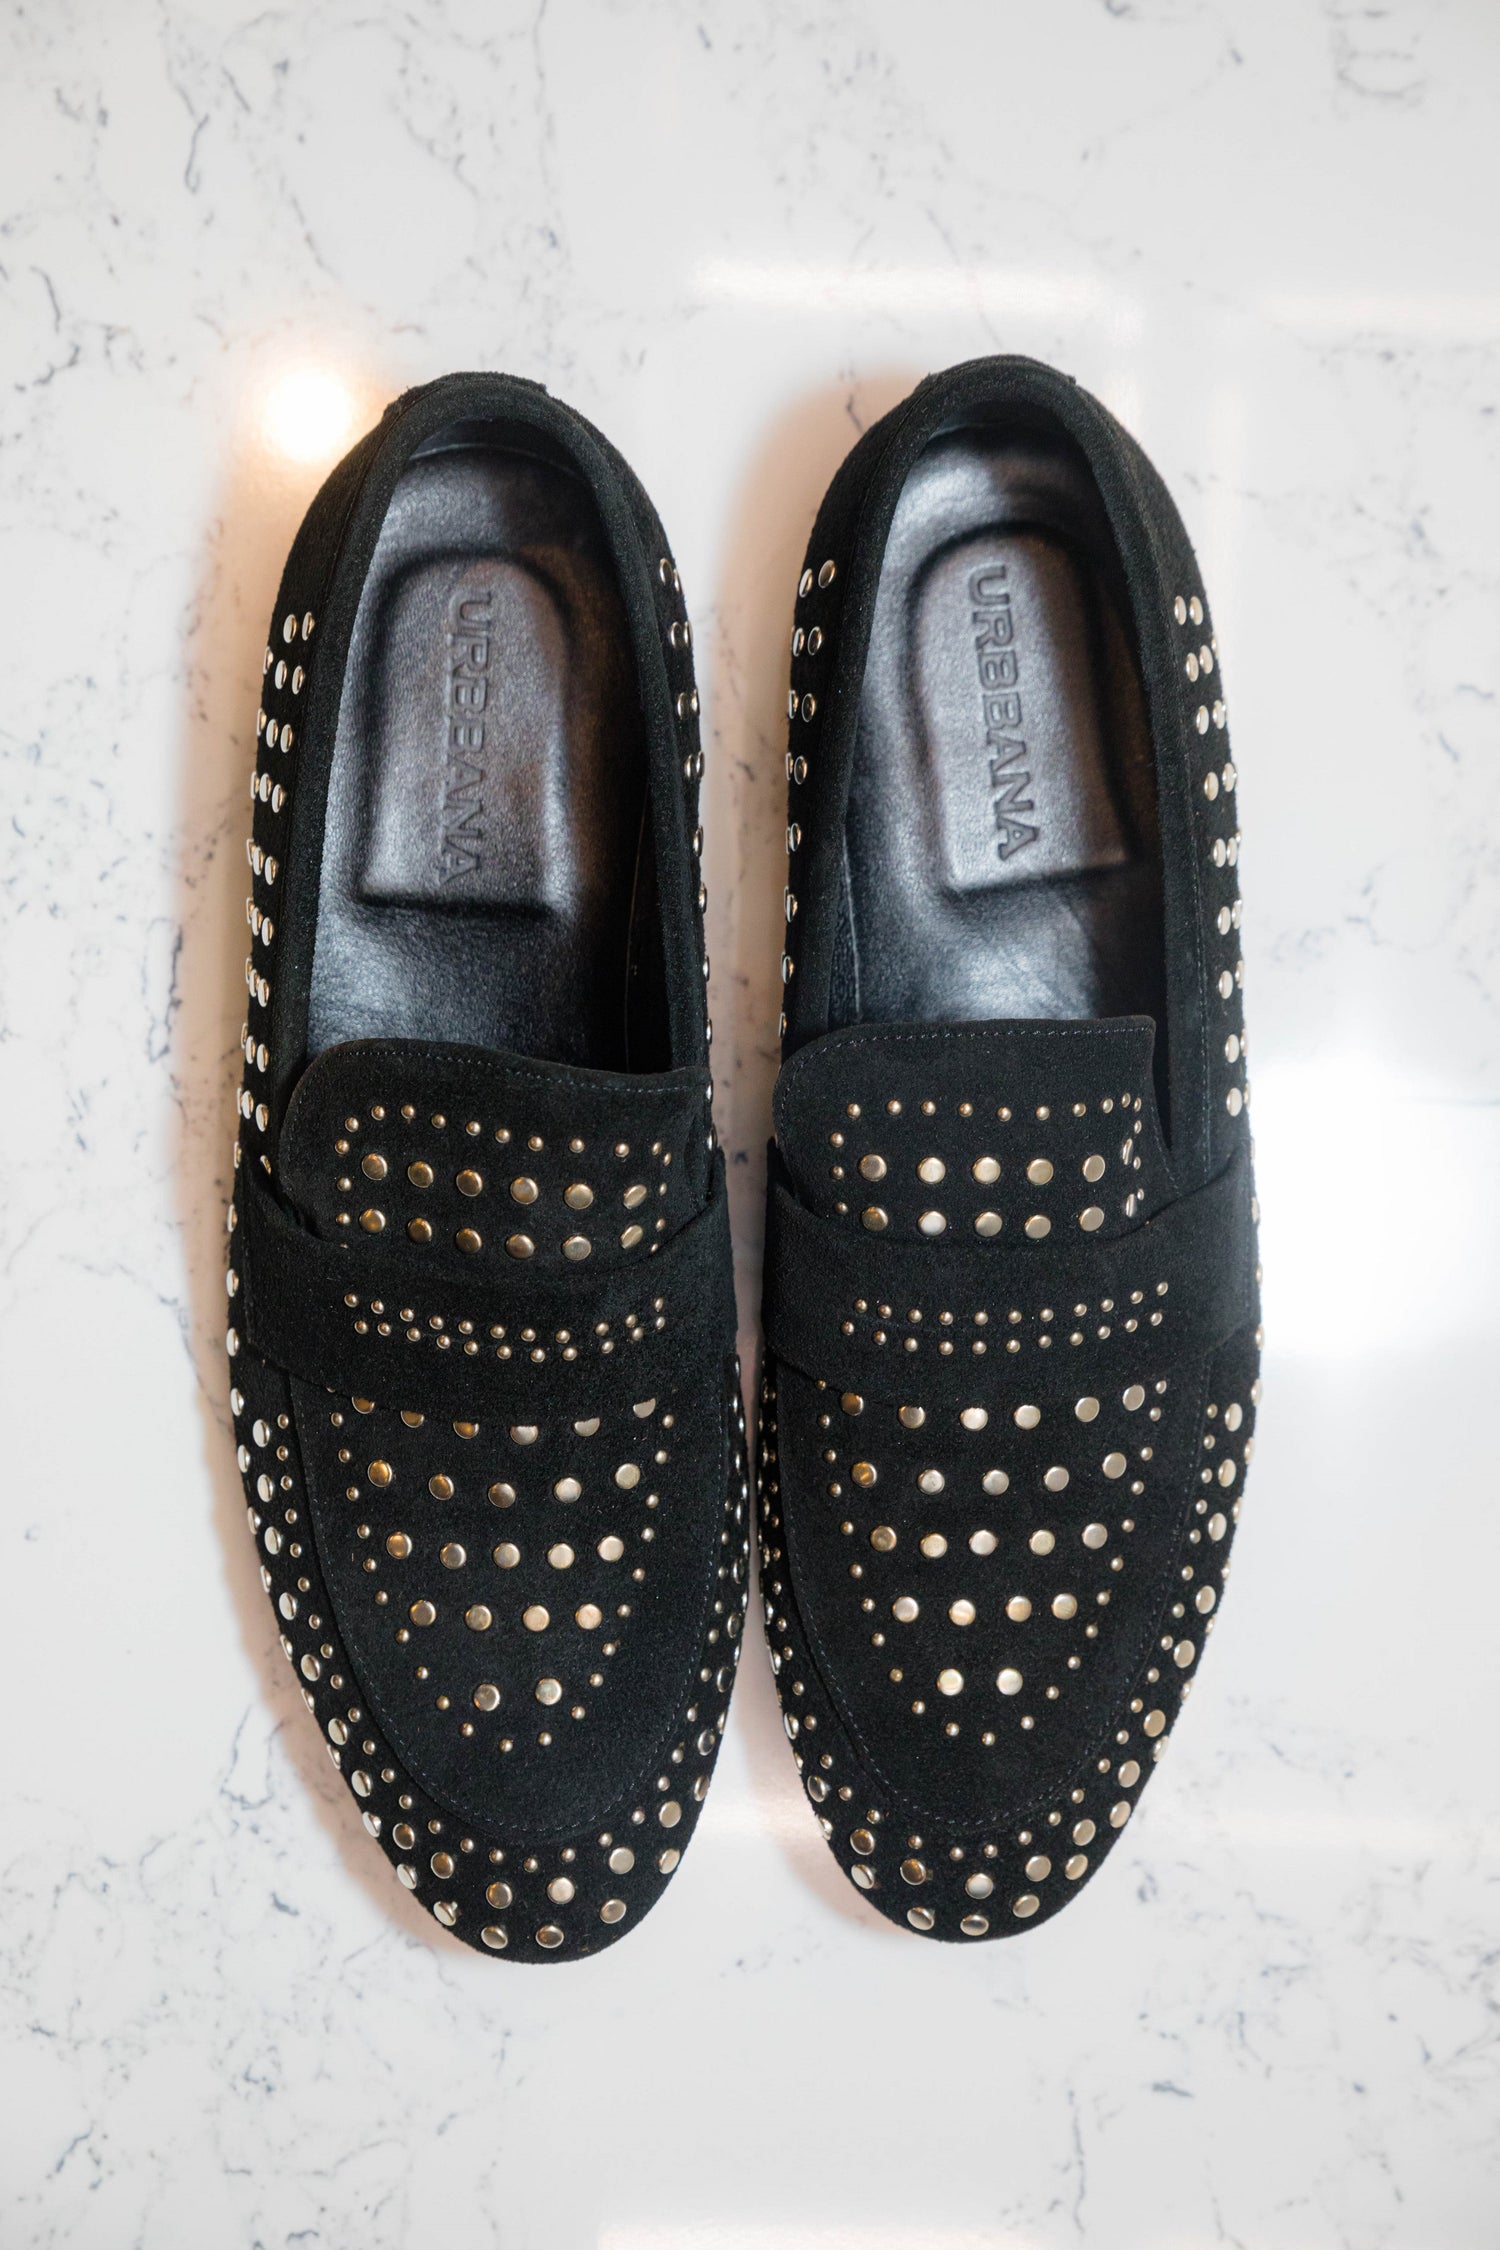 The Stud Loafers - Black - Loafers by Urbbana